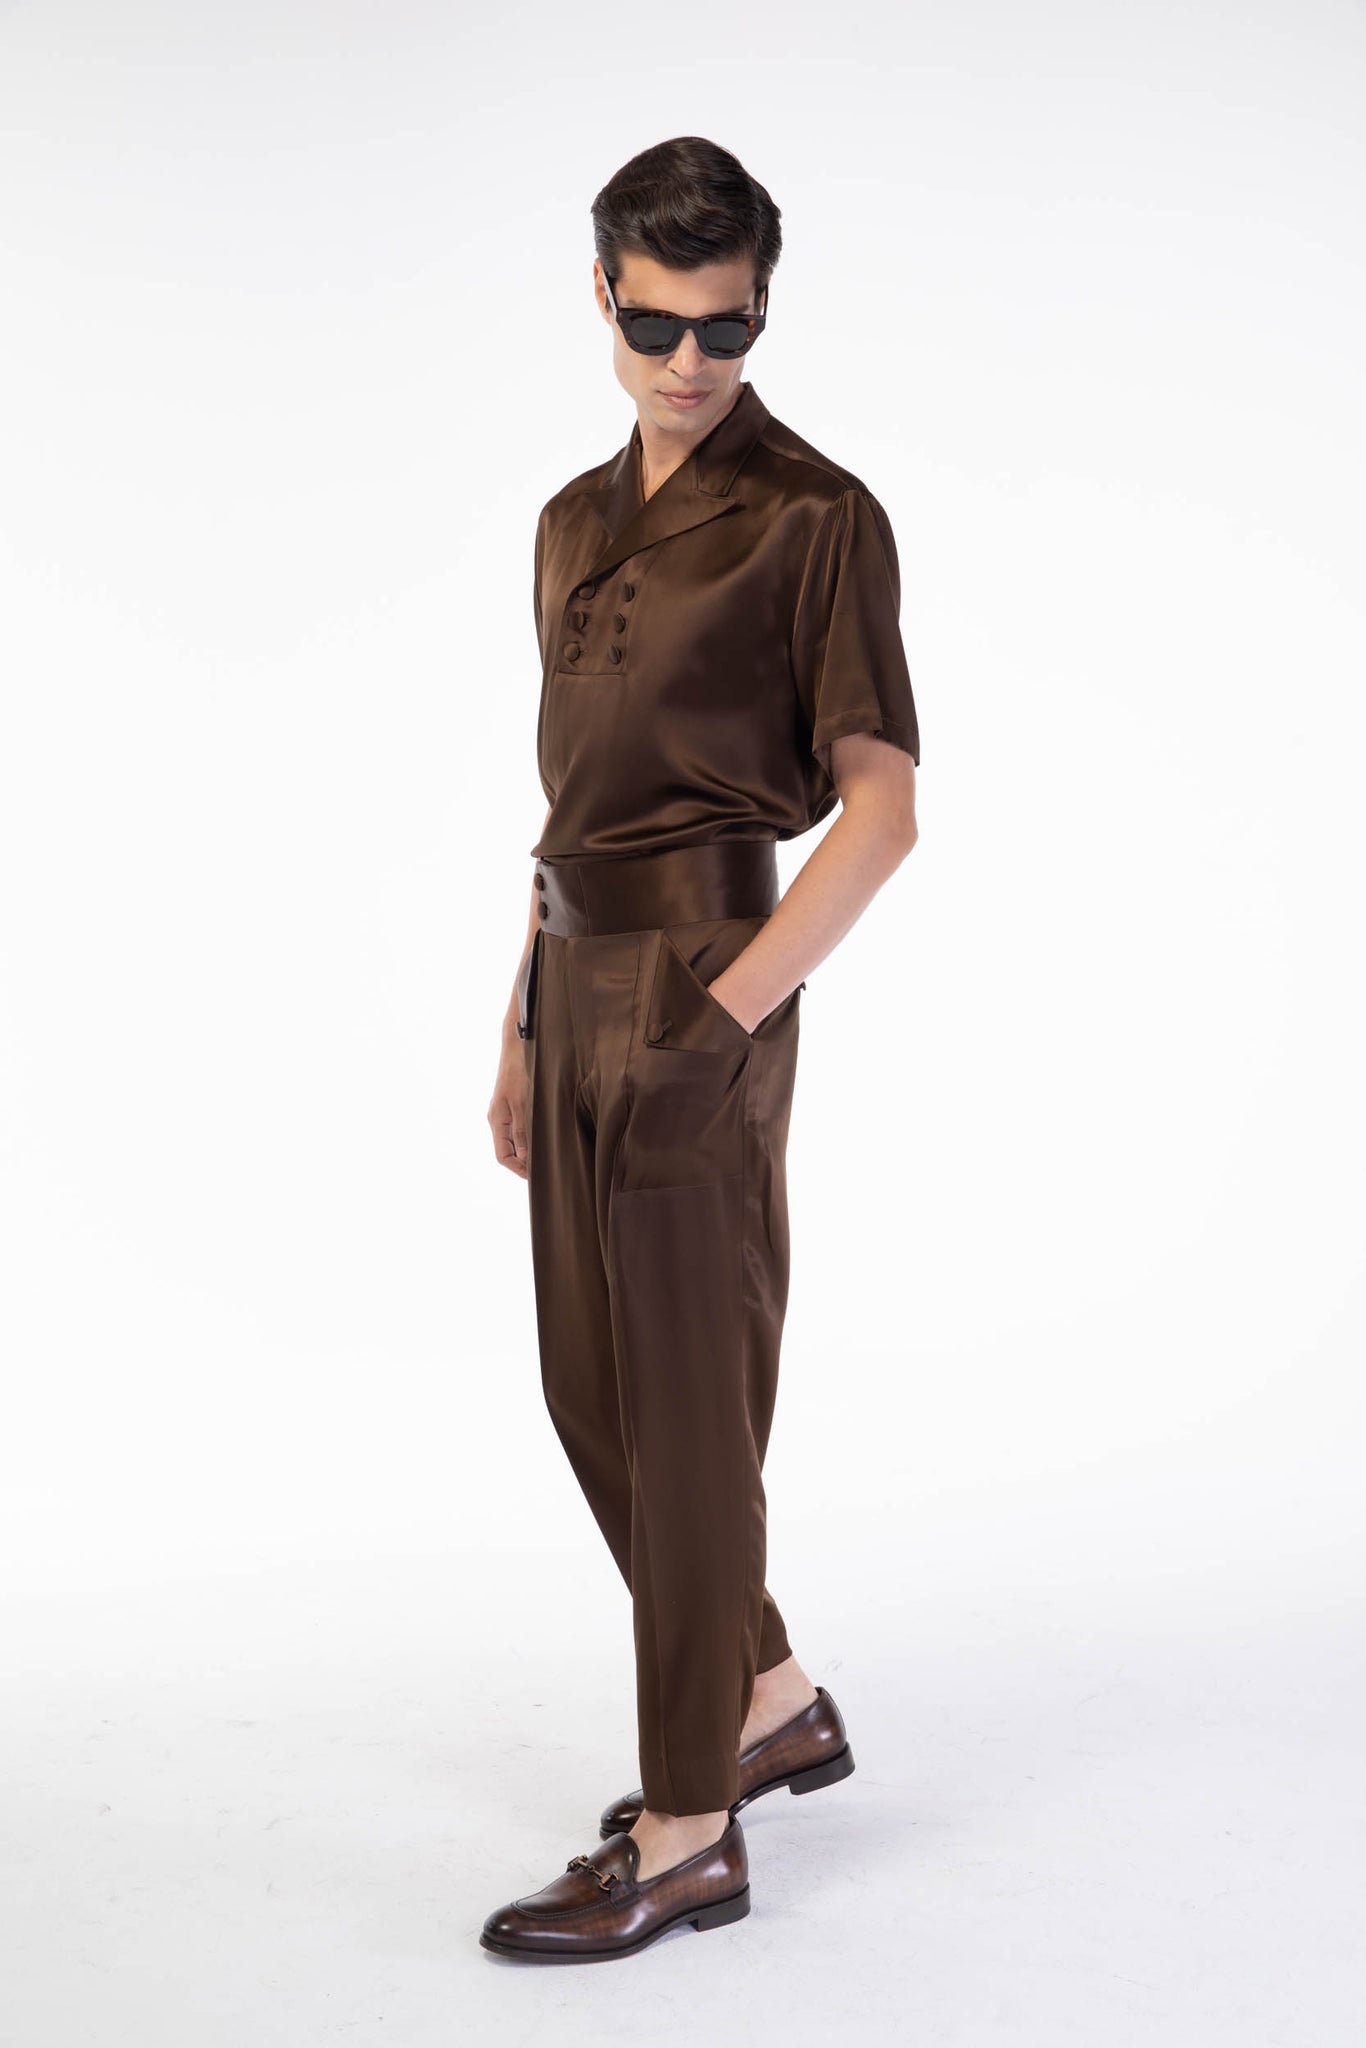 BROWN SILK SIGNATURE 6 BUTTON POLO SHORT SLEEVE SHIRT AND PANTS